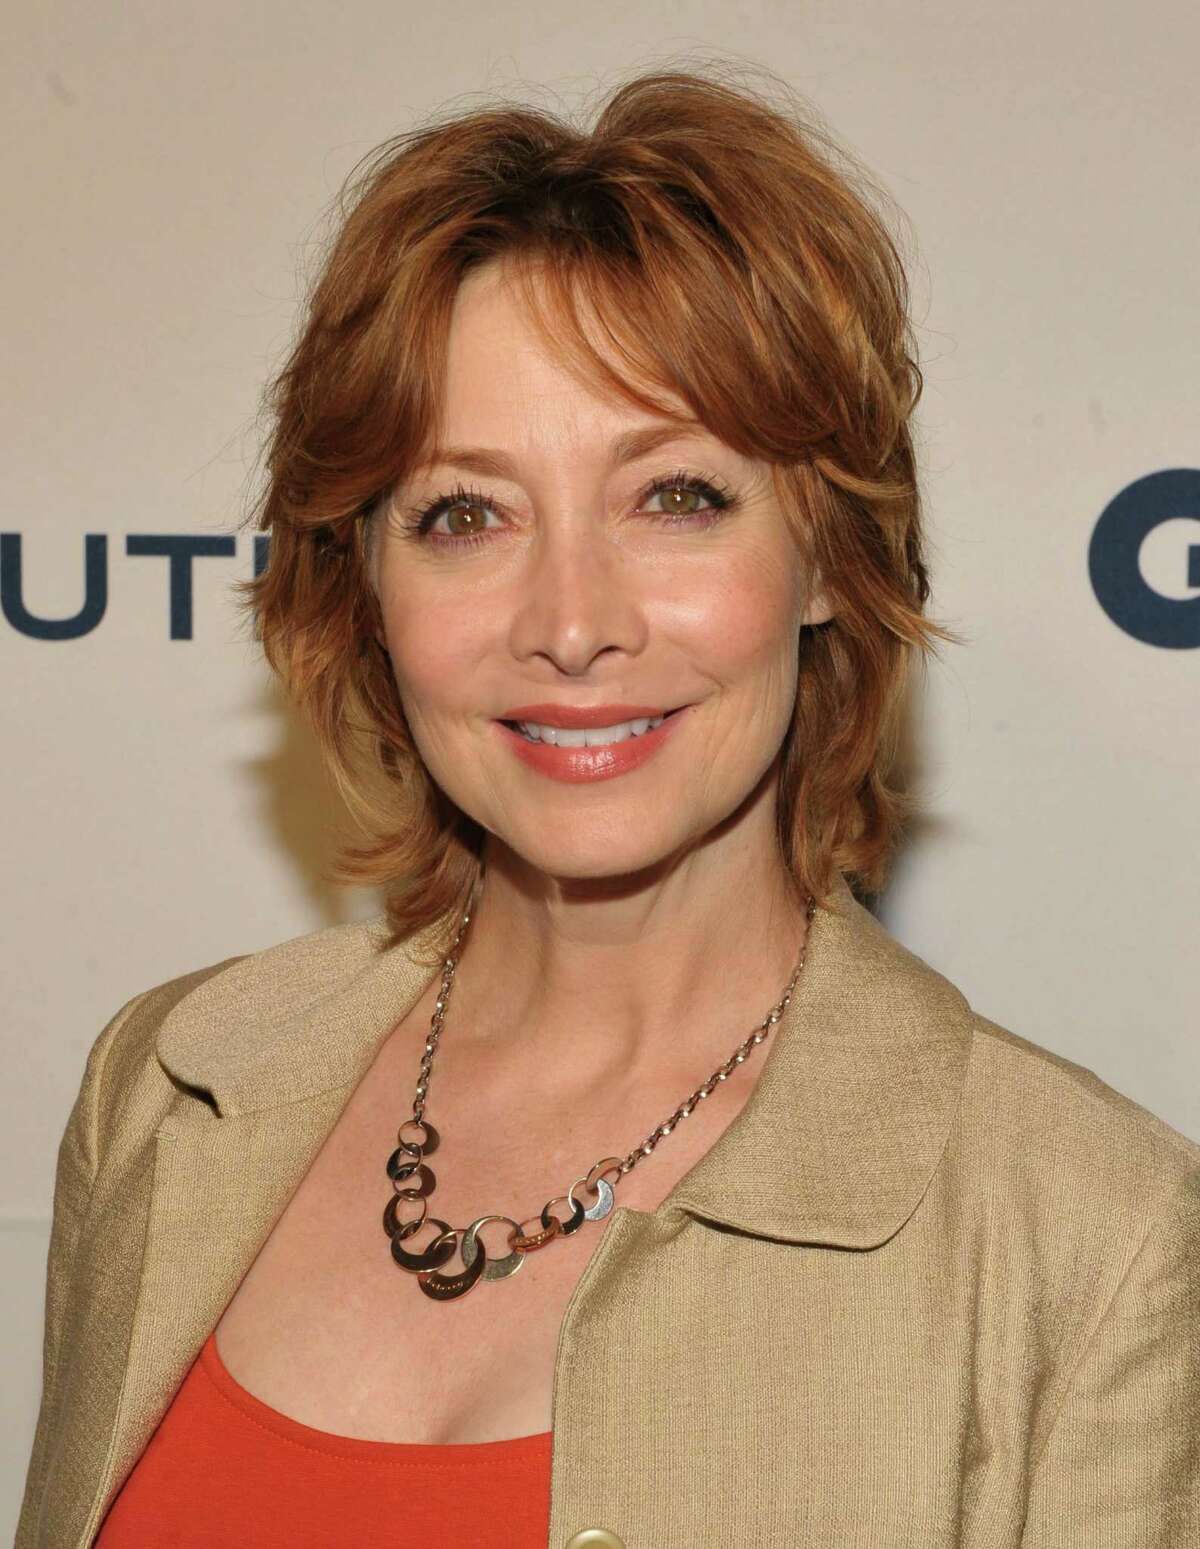 WEST HOLLYWOOD, CA - JUNE 08: Actress Sharon Lawrence attends the "GQ, Nautica, and Oceana World Oceans Day Party" at Sunset Tower on June 8, 2010 in West Hollywood, California. (Photo by John Shearer/Getty Images for GQ Magazine)